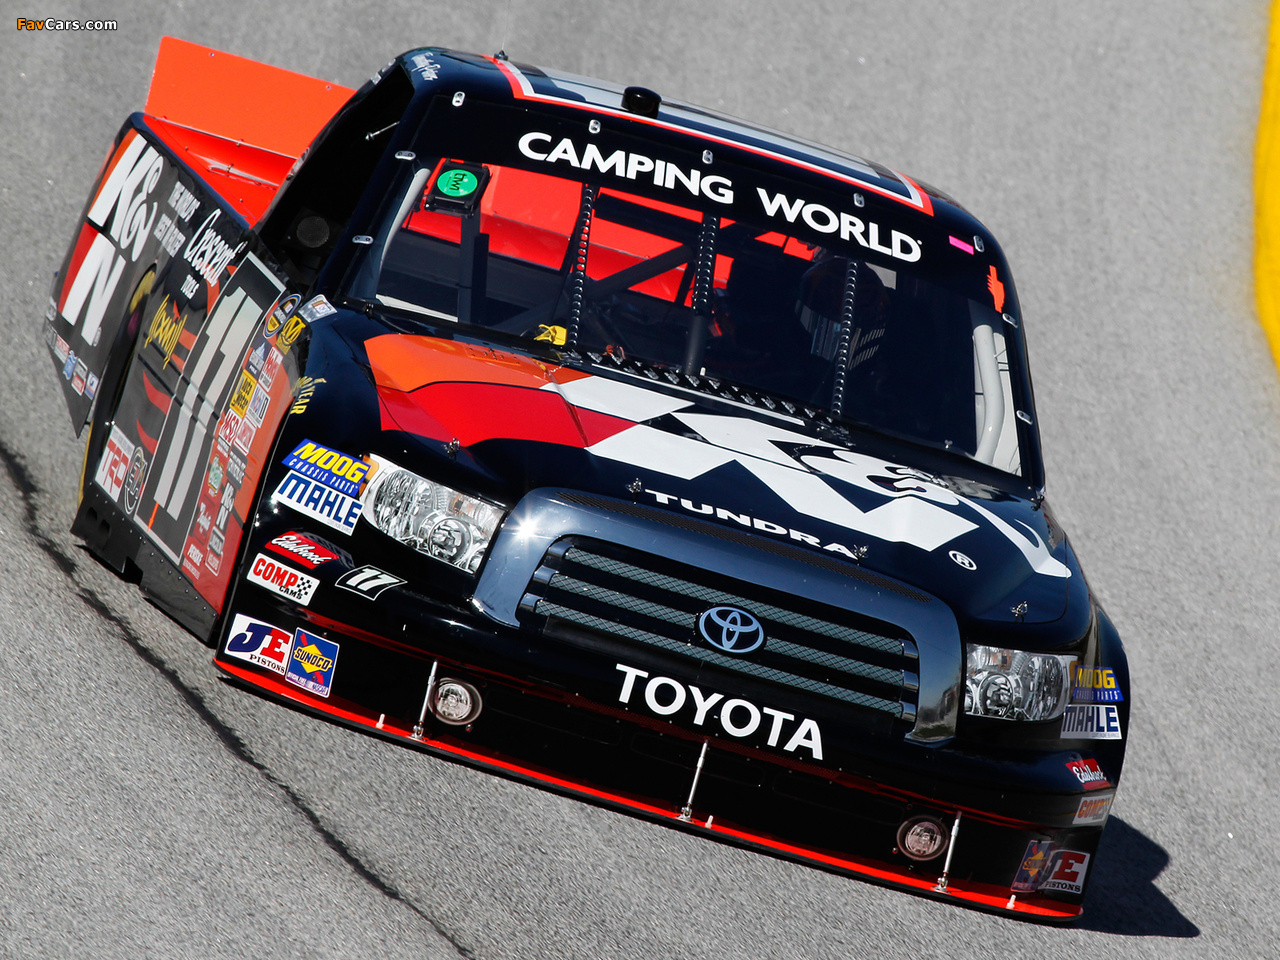 Toyota Tundra NASCAR Camping World Series Truck 2009 pictures (1280 x 960)